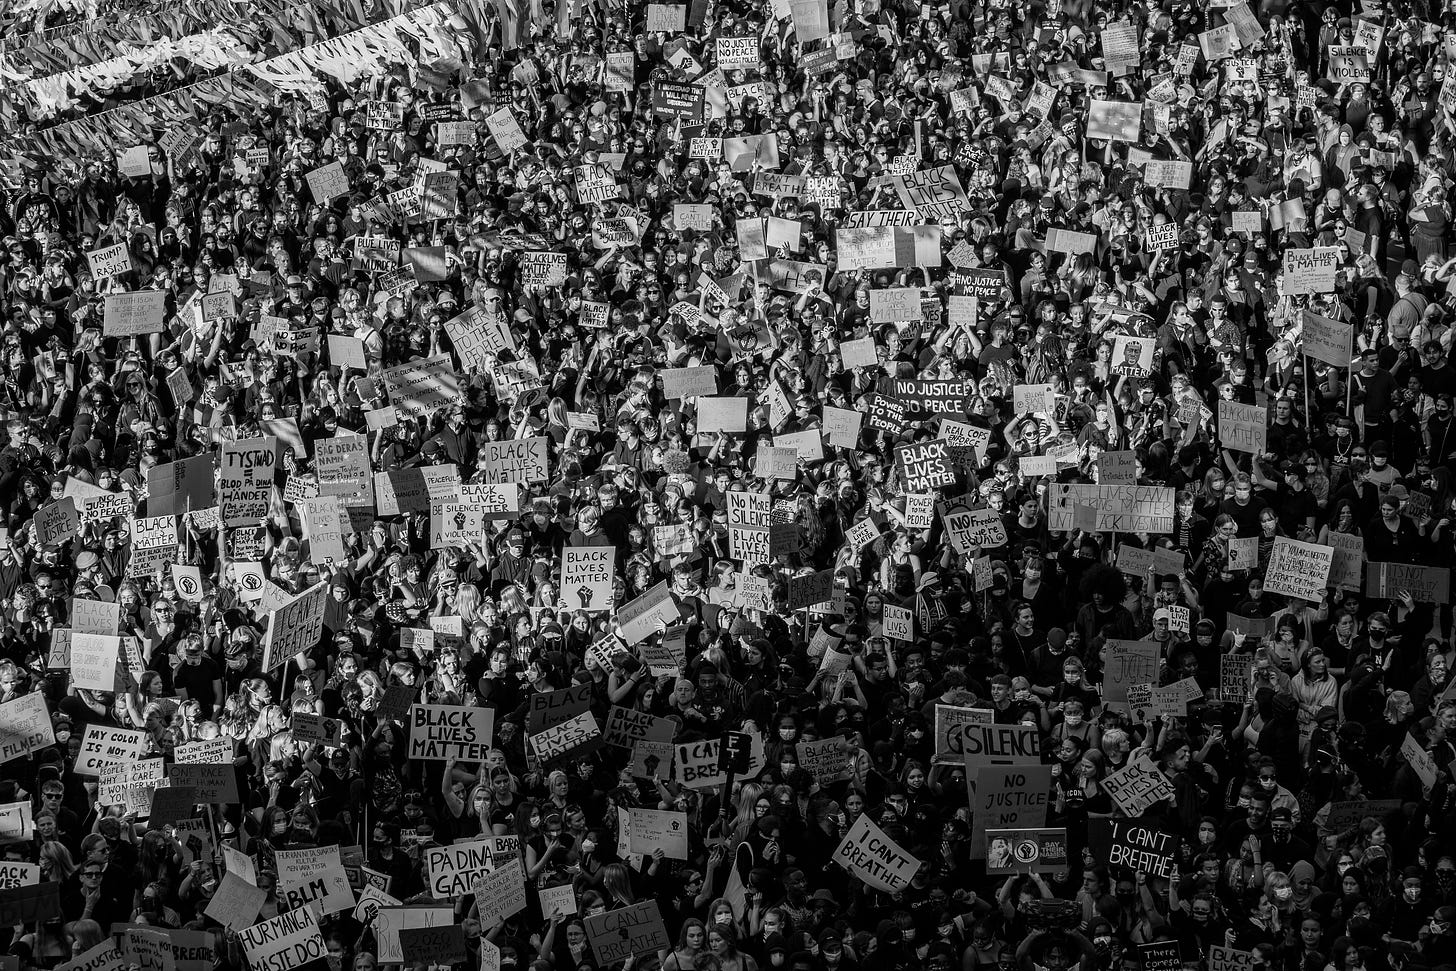 Photograph of thousands of protesters, carrying signs. Photograph by Teemu Paananen. 